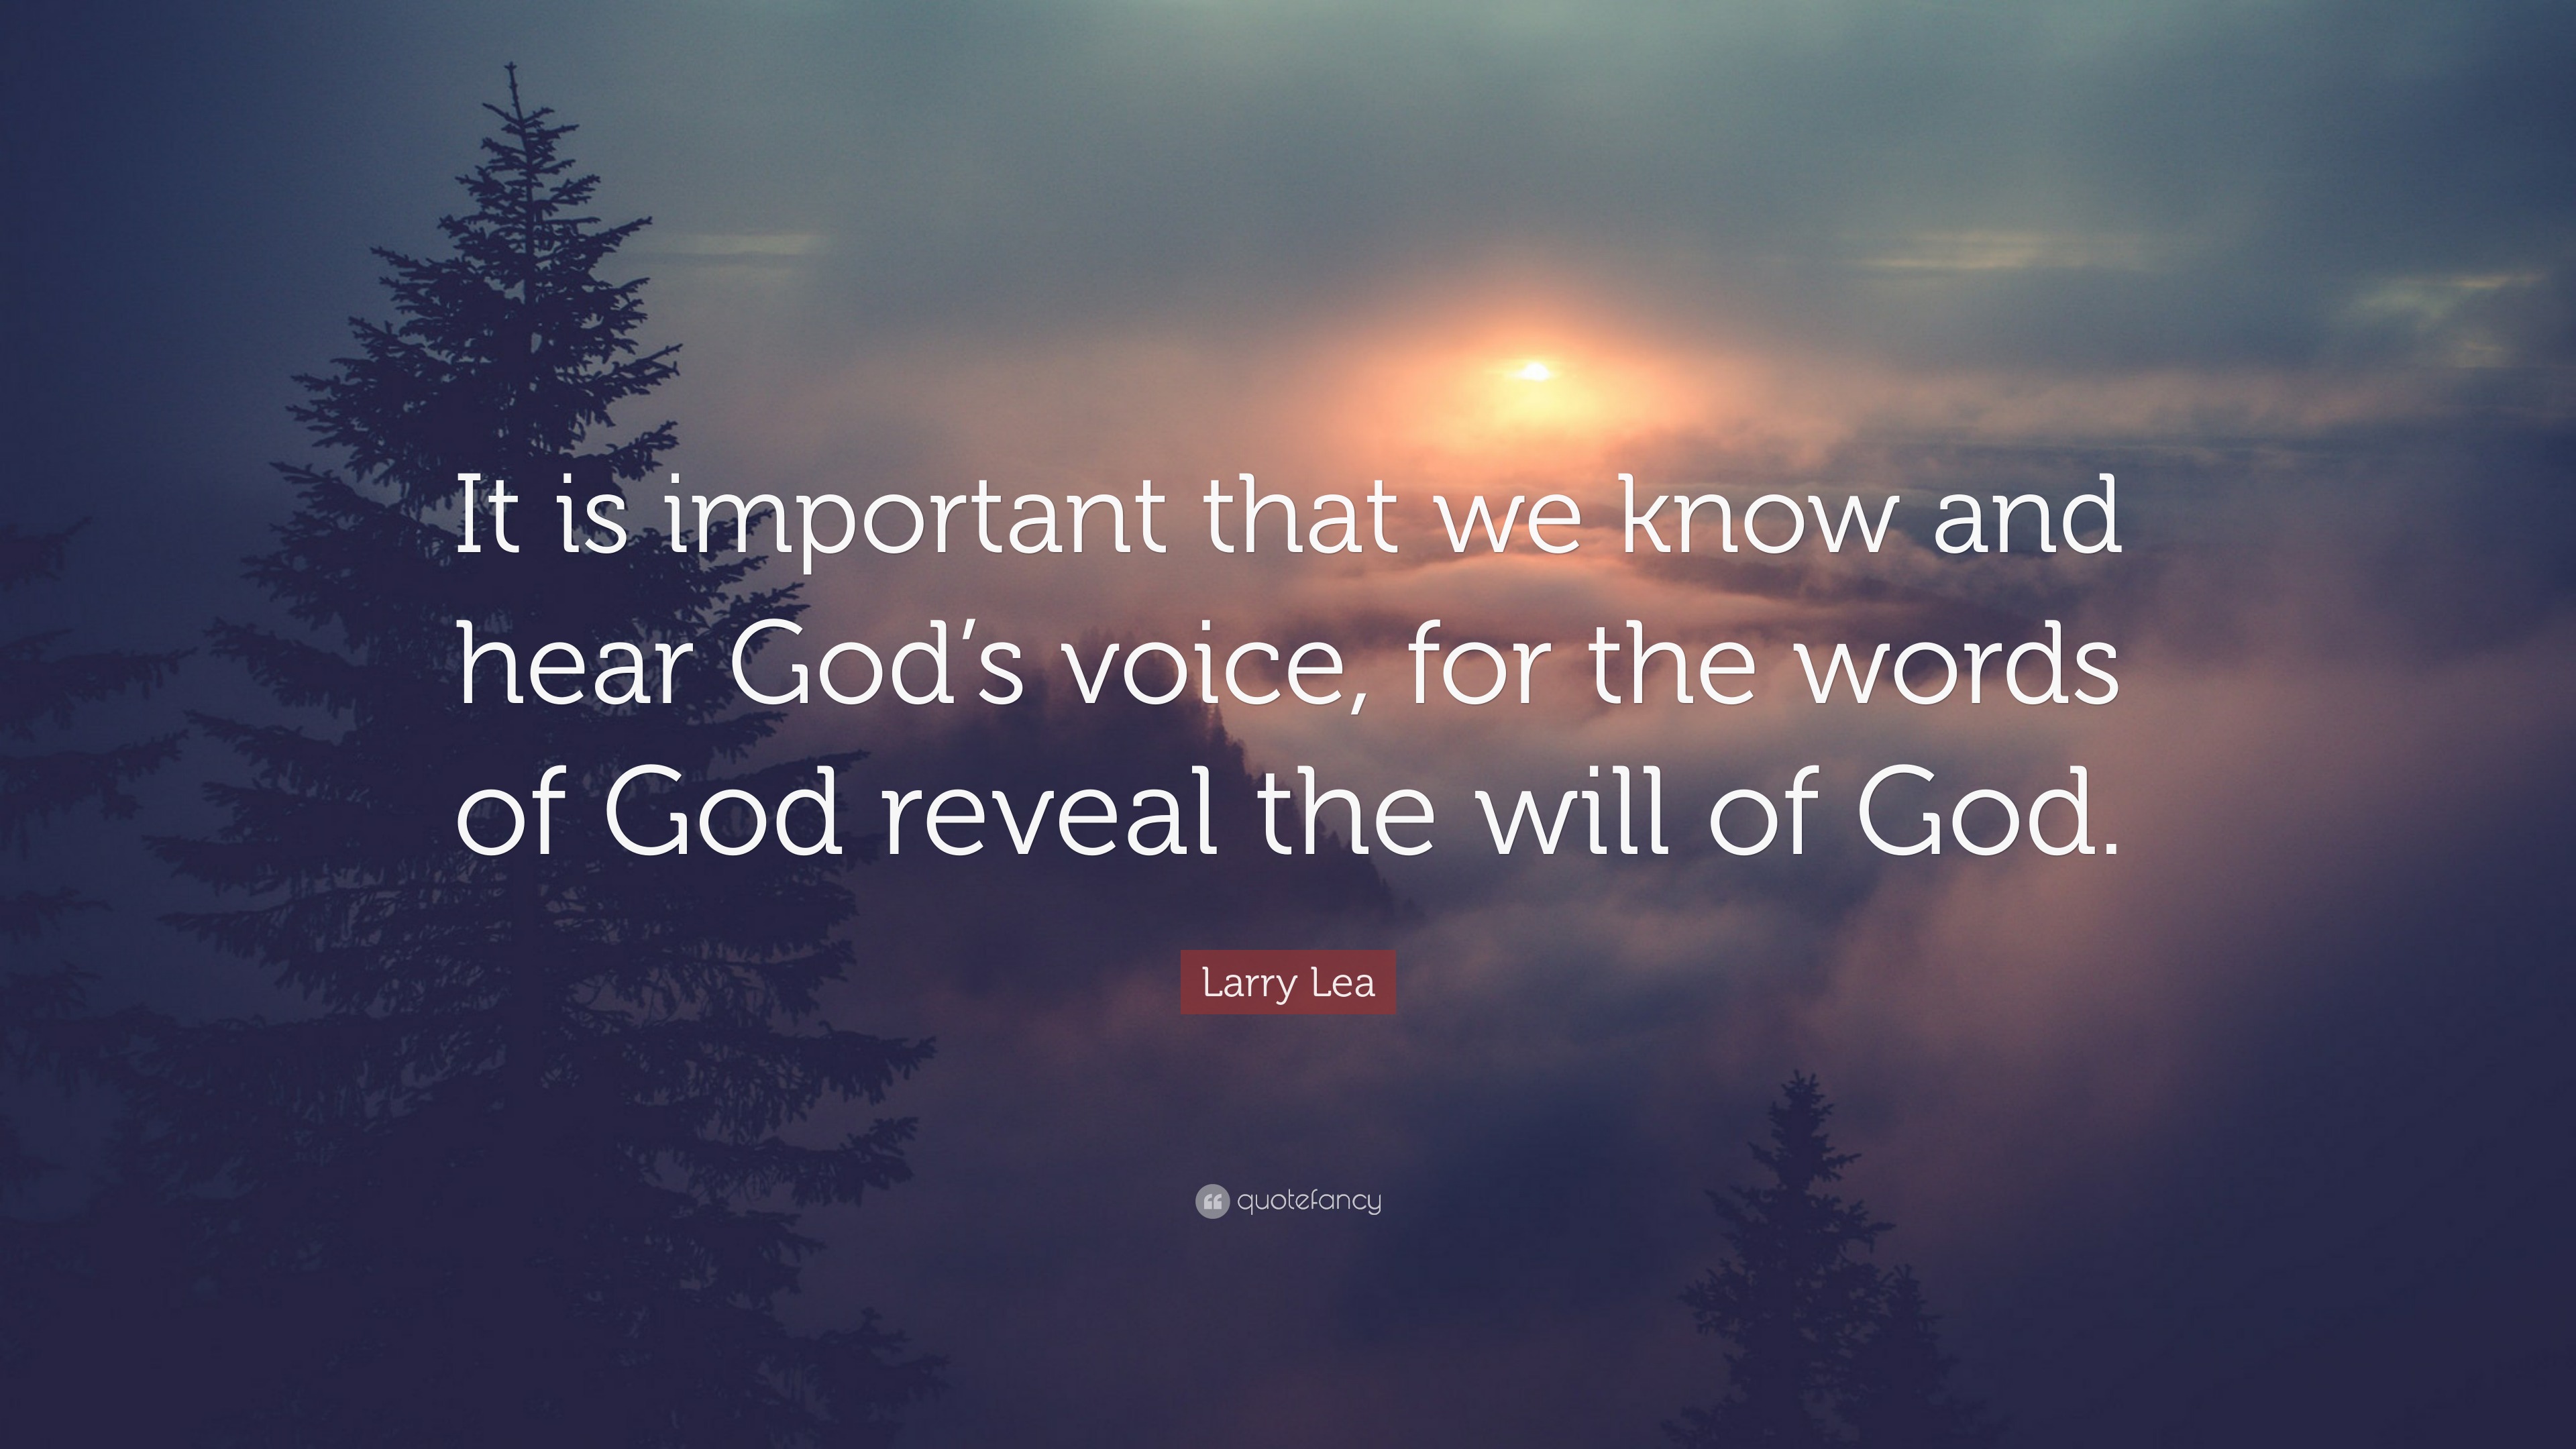 Larry Lea Quote: “It is important that we know and hear God’s voice ...